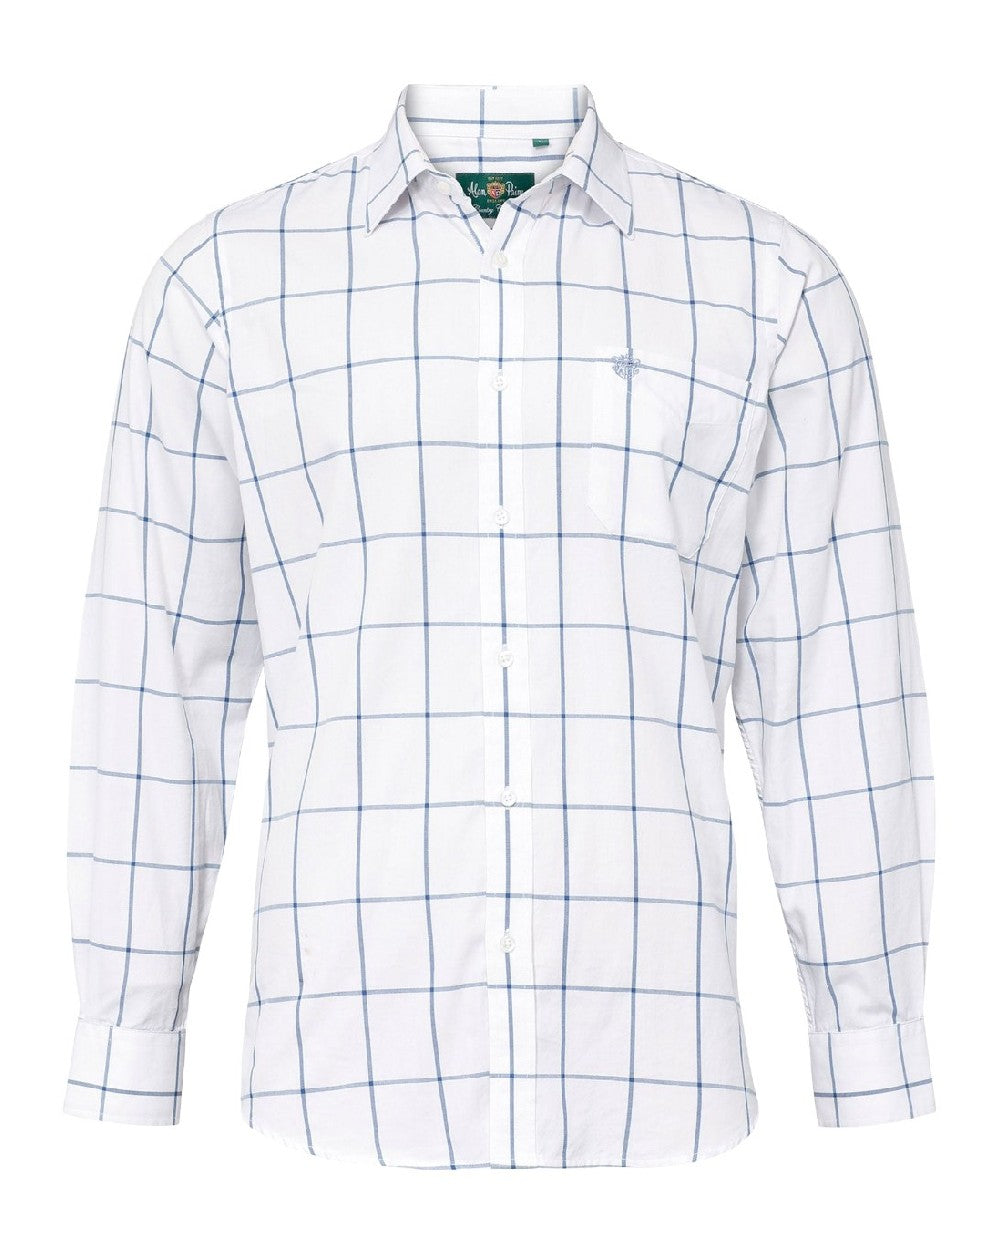 Alan Paine Ilkley Shirt in Blue Check 